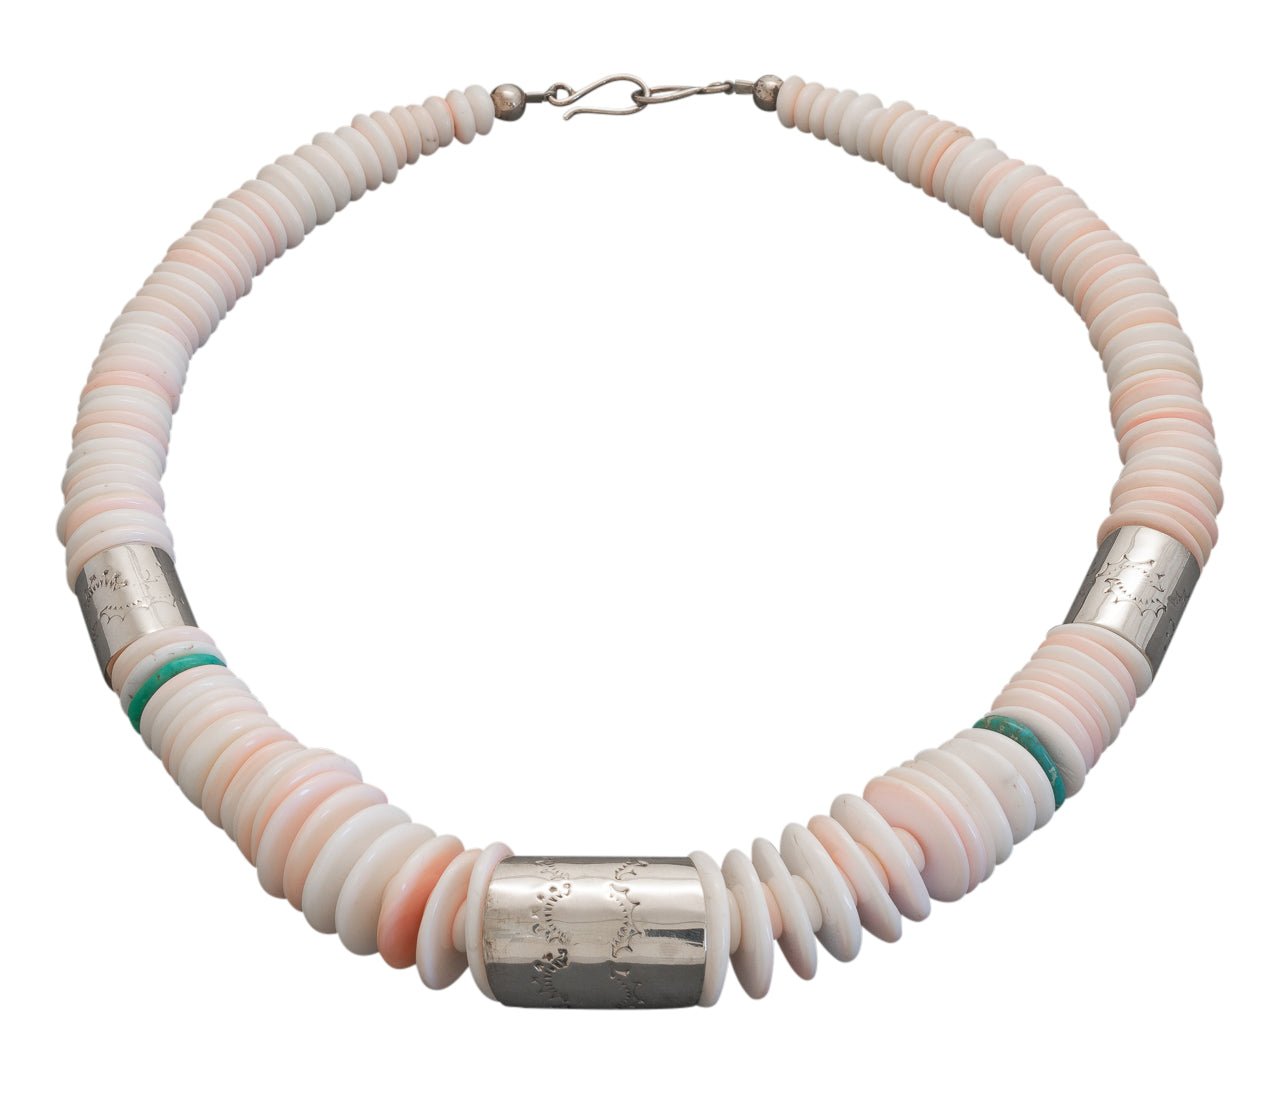 Nestoria Coriz Statement Necklace of Pink Conch Shell and Silver - Turquoise & Tufa